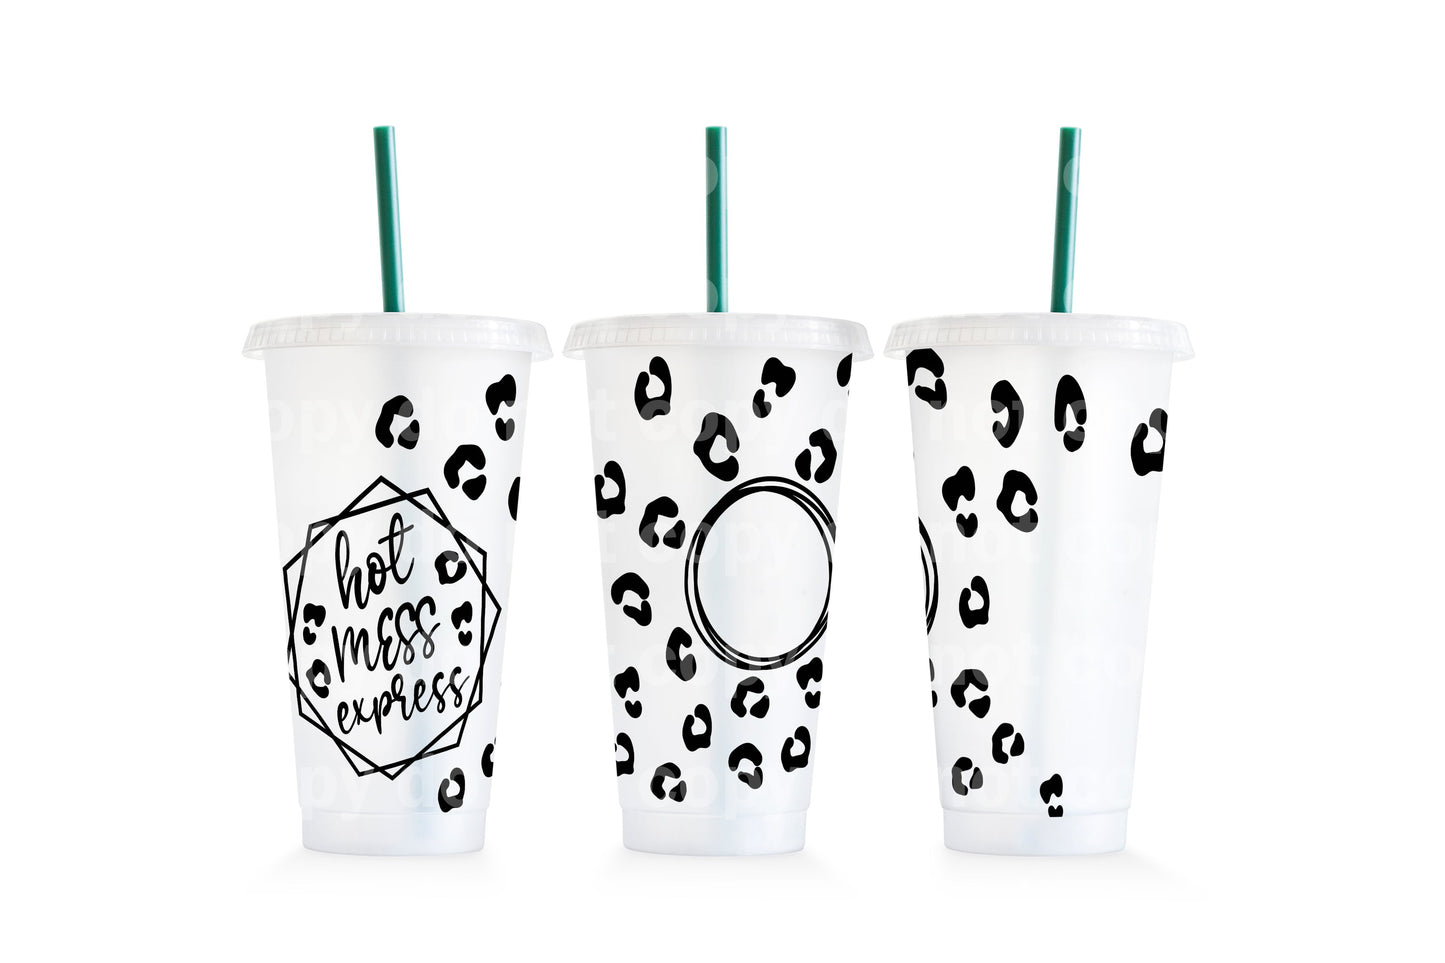 Hot Mess Express Cup Wrap 24oz Cold Cup Wrap